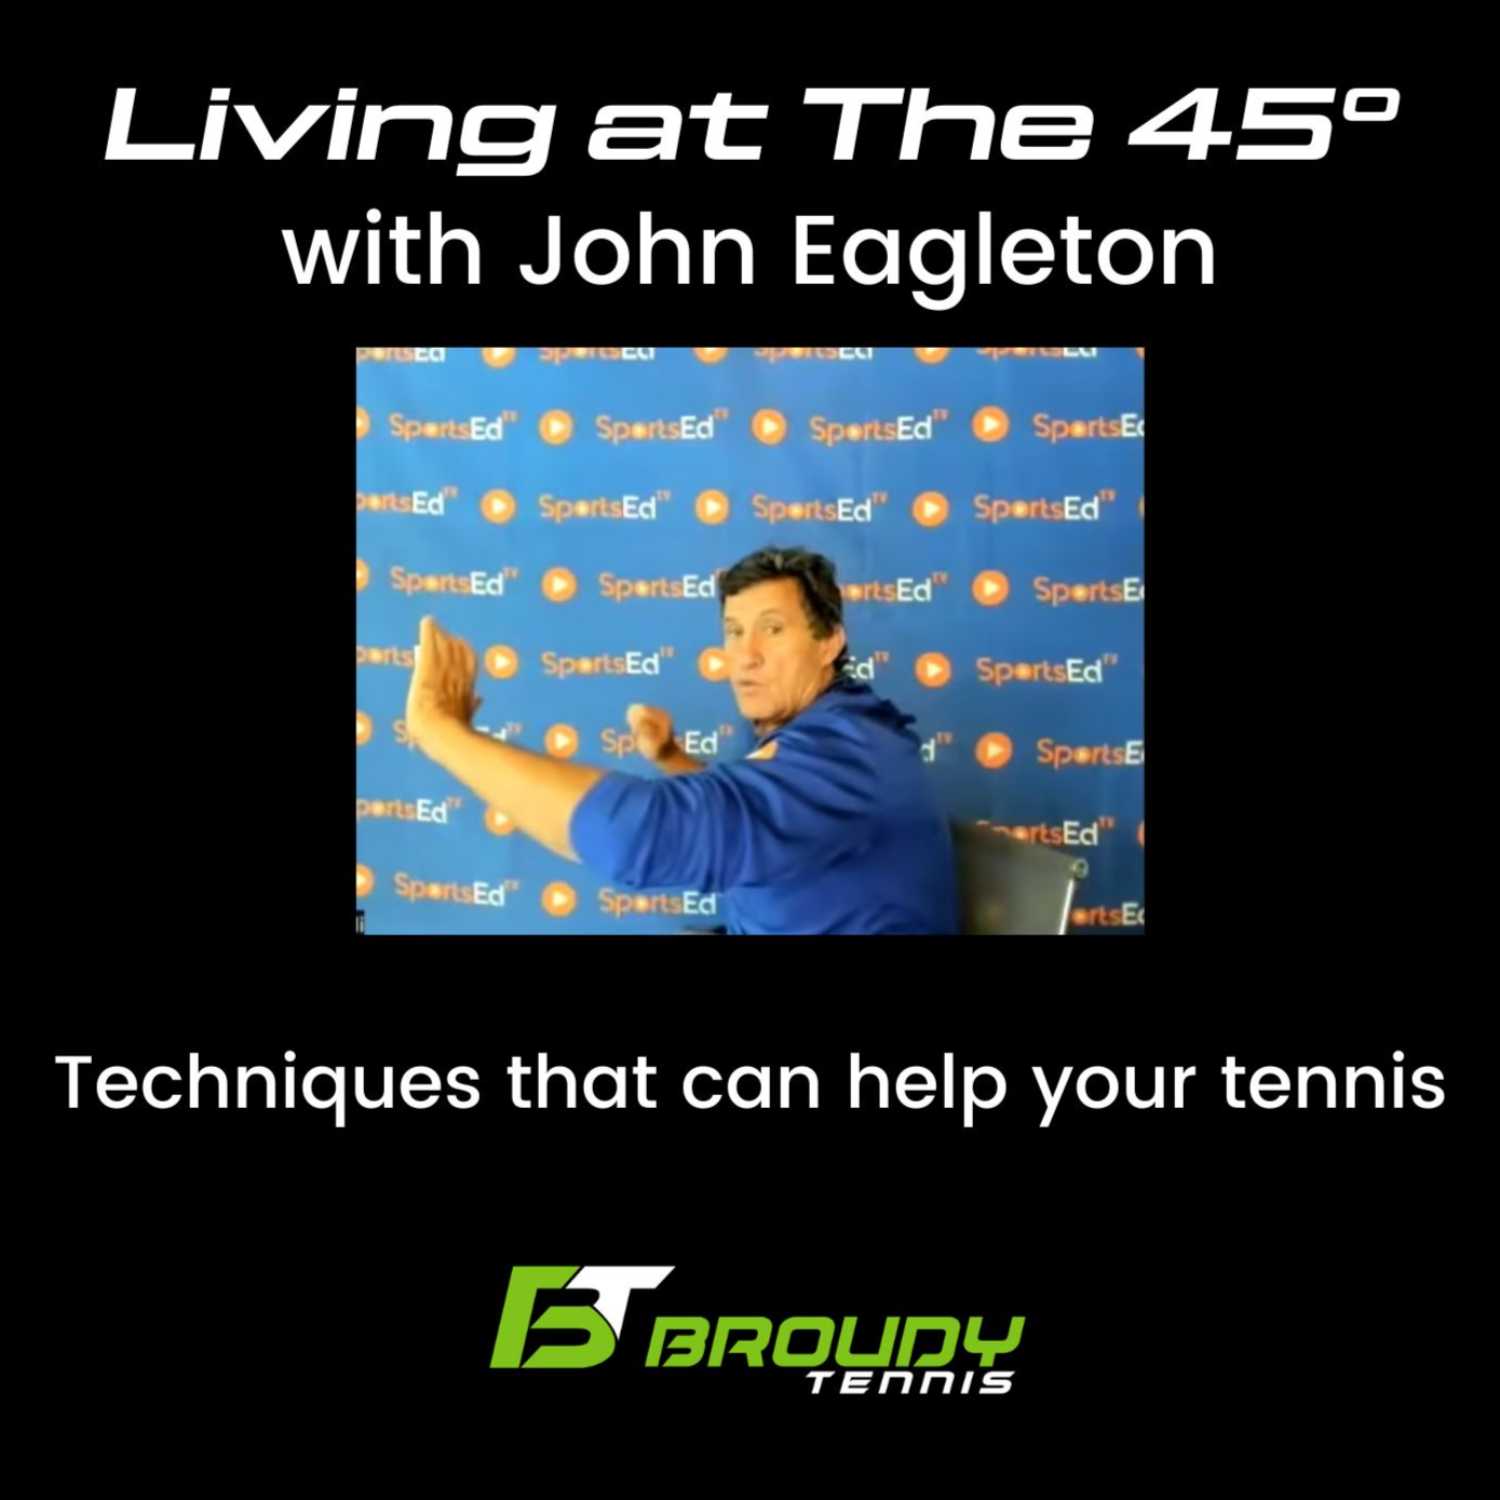 Living at The 45º with John Eagleton: High Level Coaching and SportsEdTV